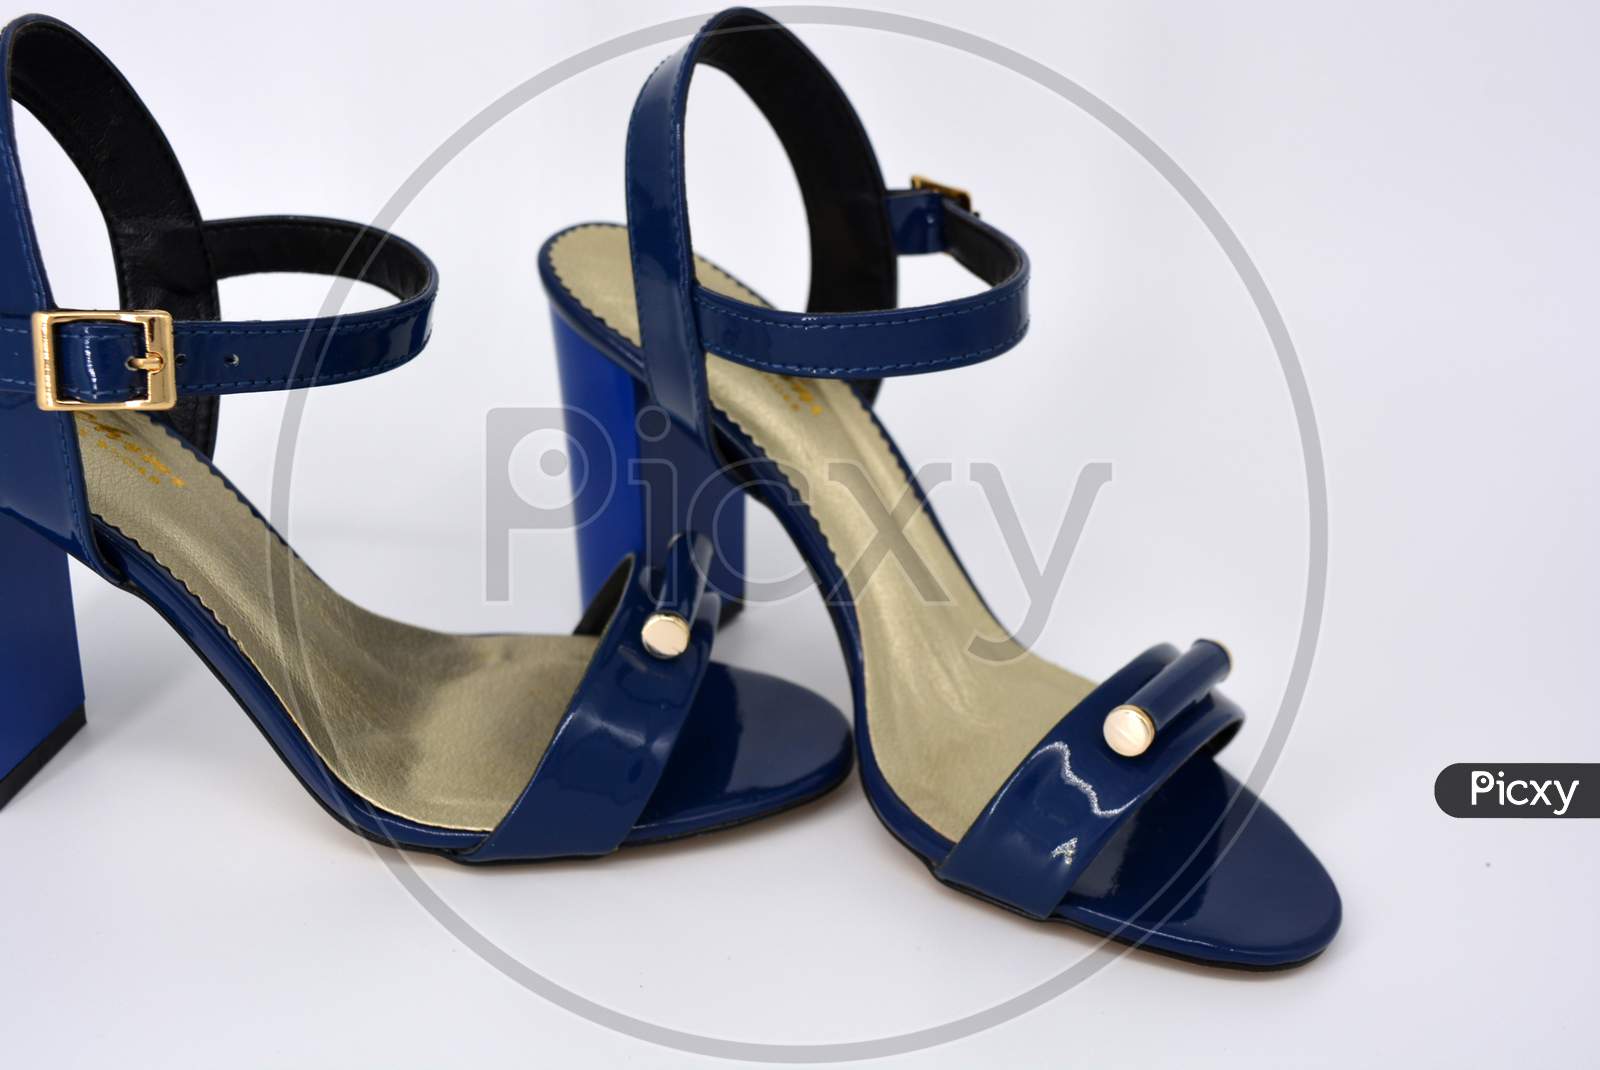 One thing, one pair of female blue lacquer sandals on a wide heel with a golden insole located on a white background.